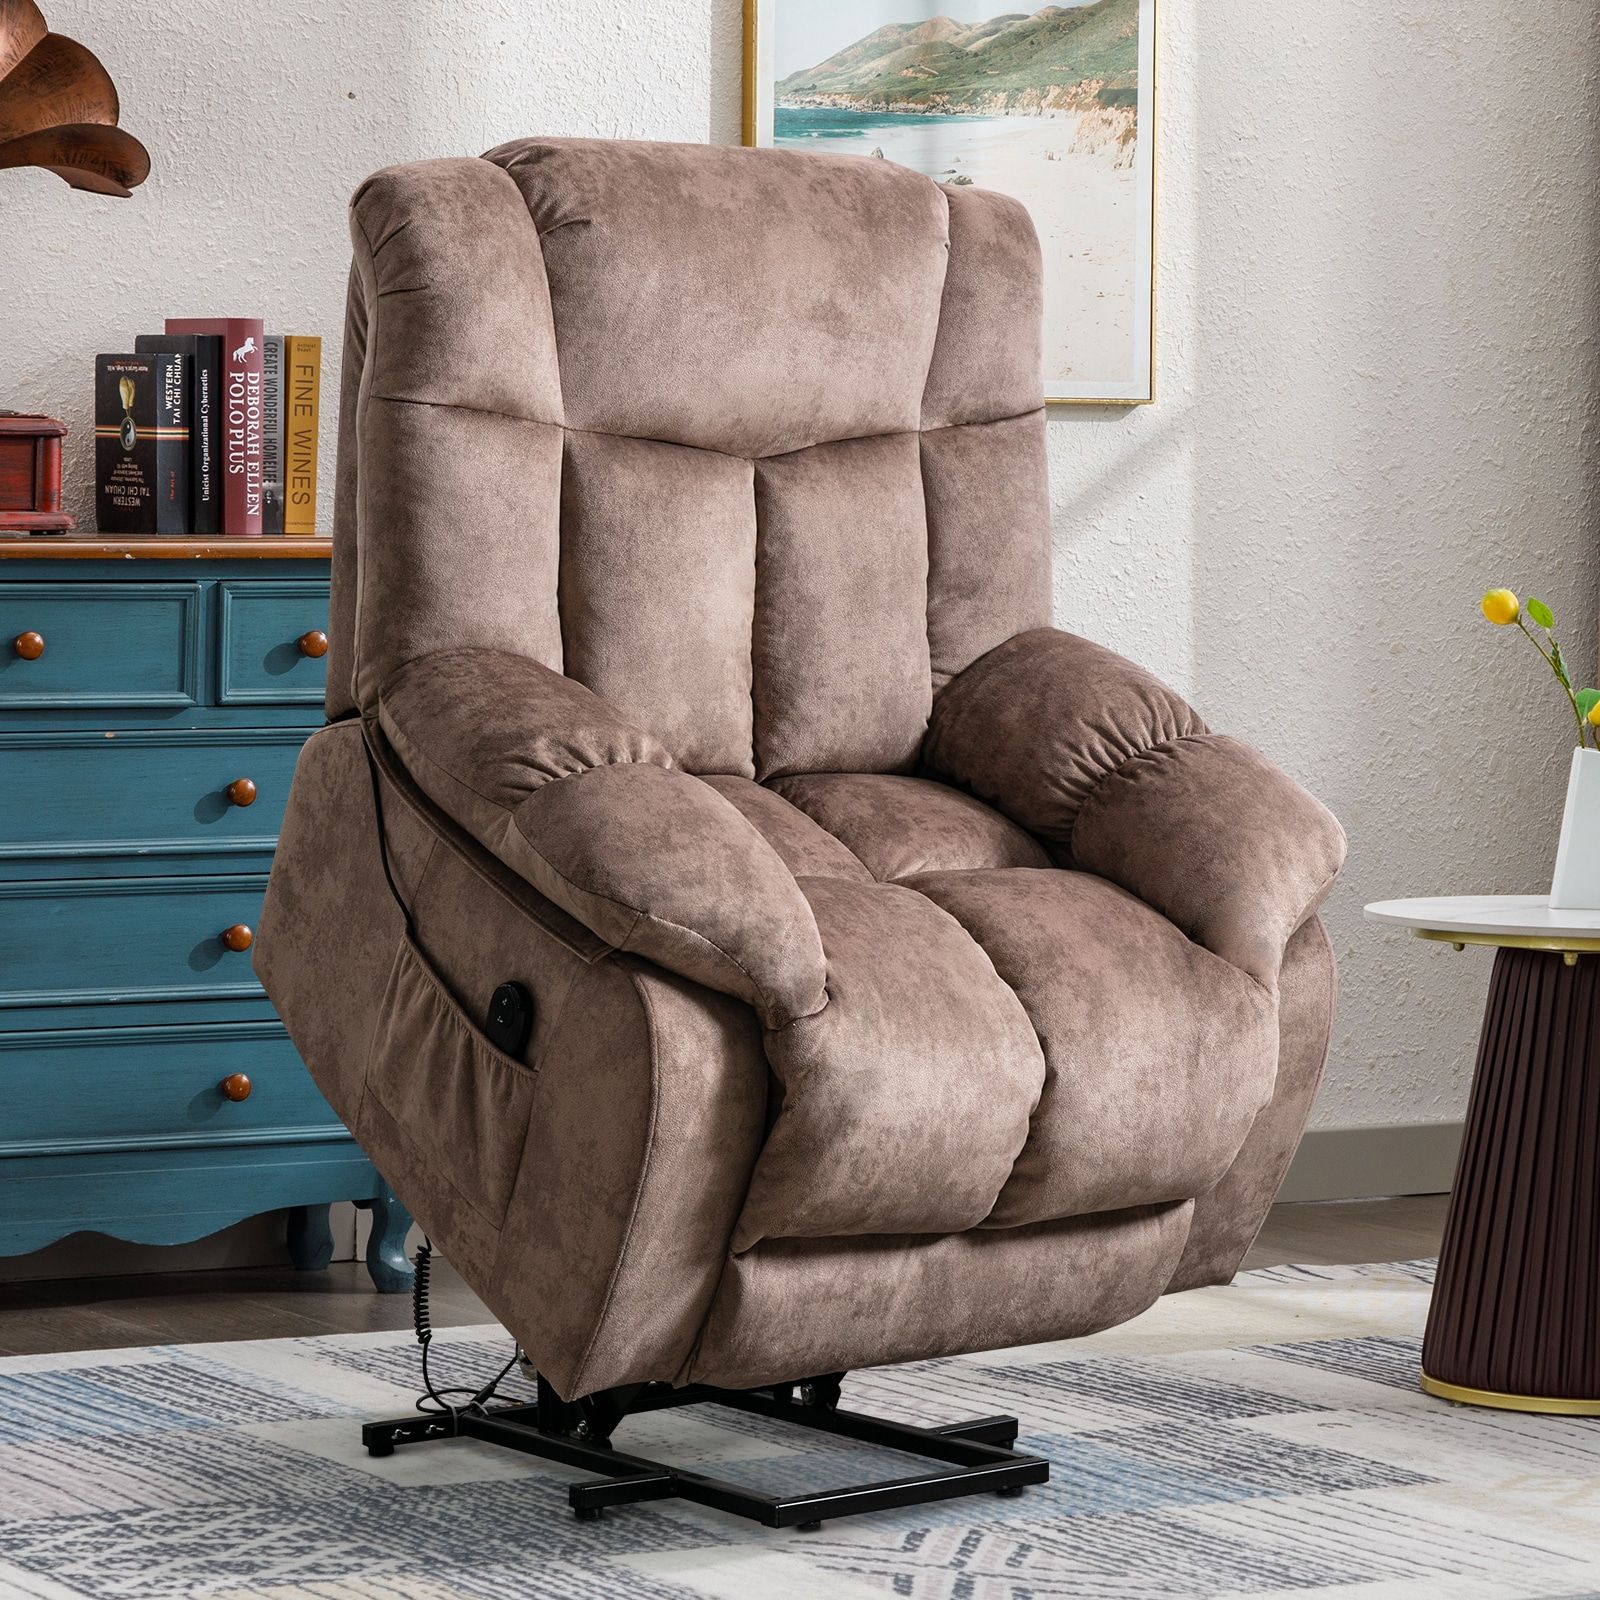 Canmov Power Lift Recliner Camel Velvet Powered Reclining Recliner With  Lift Assistance In The Recliners Department At Lowes With Modern Velvet Sofa Recliners With Storage (View 11 of 15)